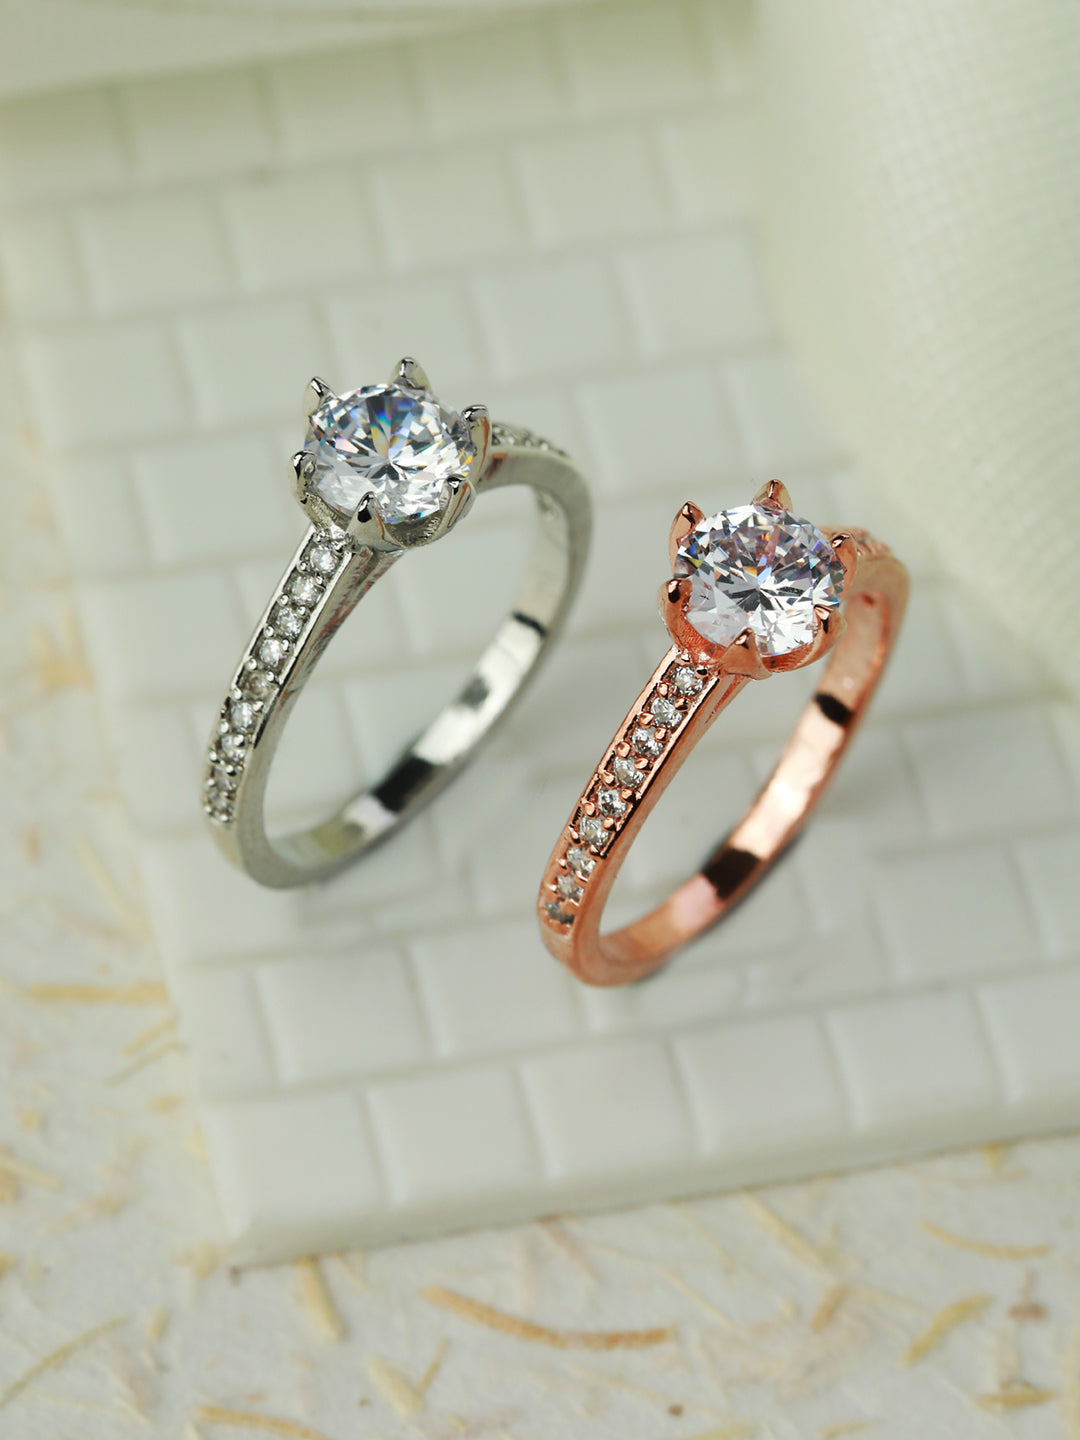 Solitaire Silver Rose Gold Plated Ring Set of 2 - NOZ2TOZ